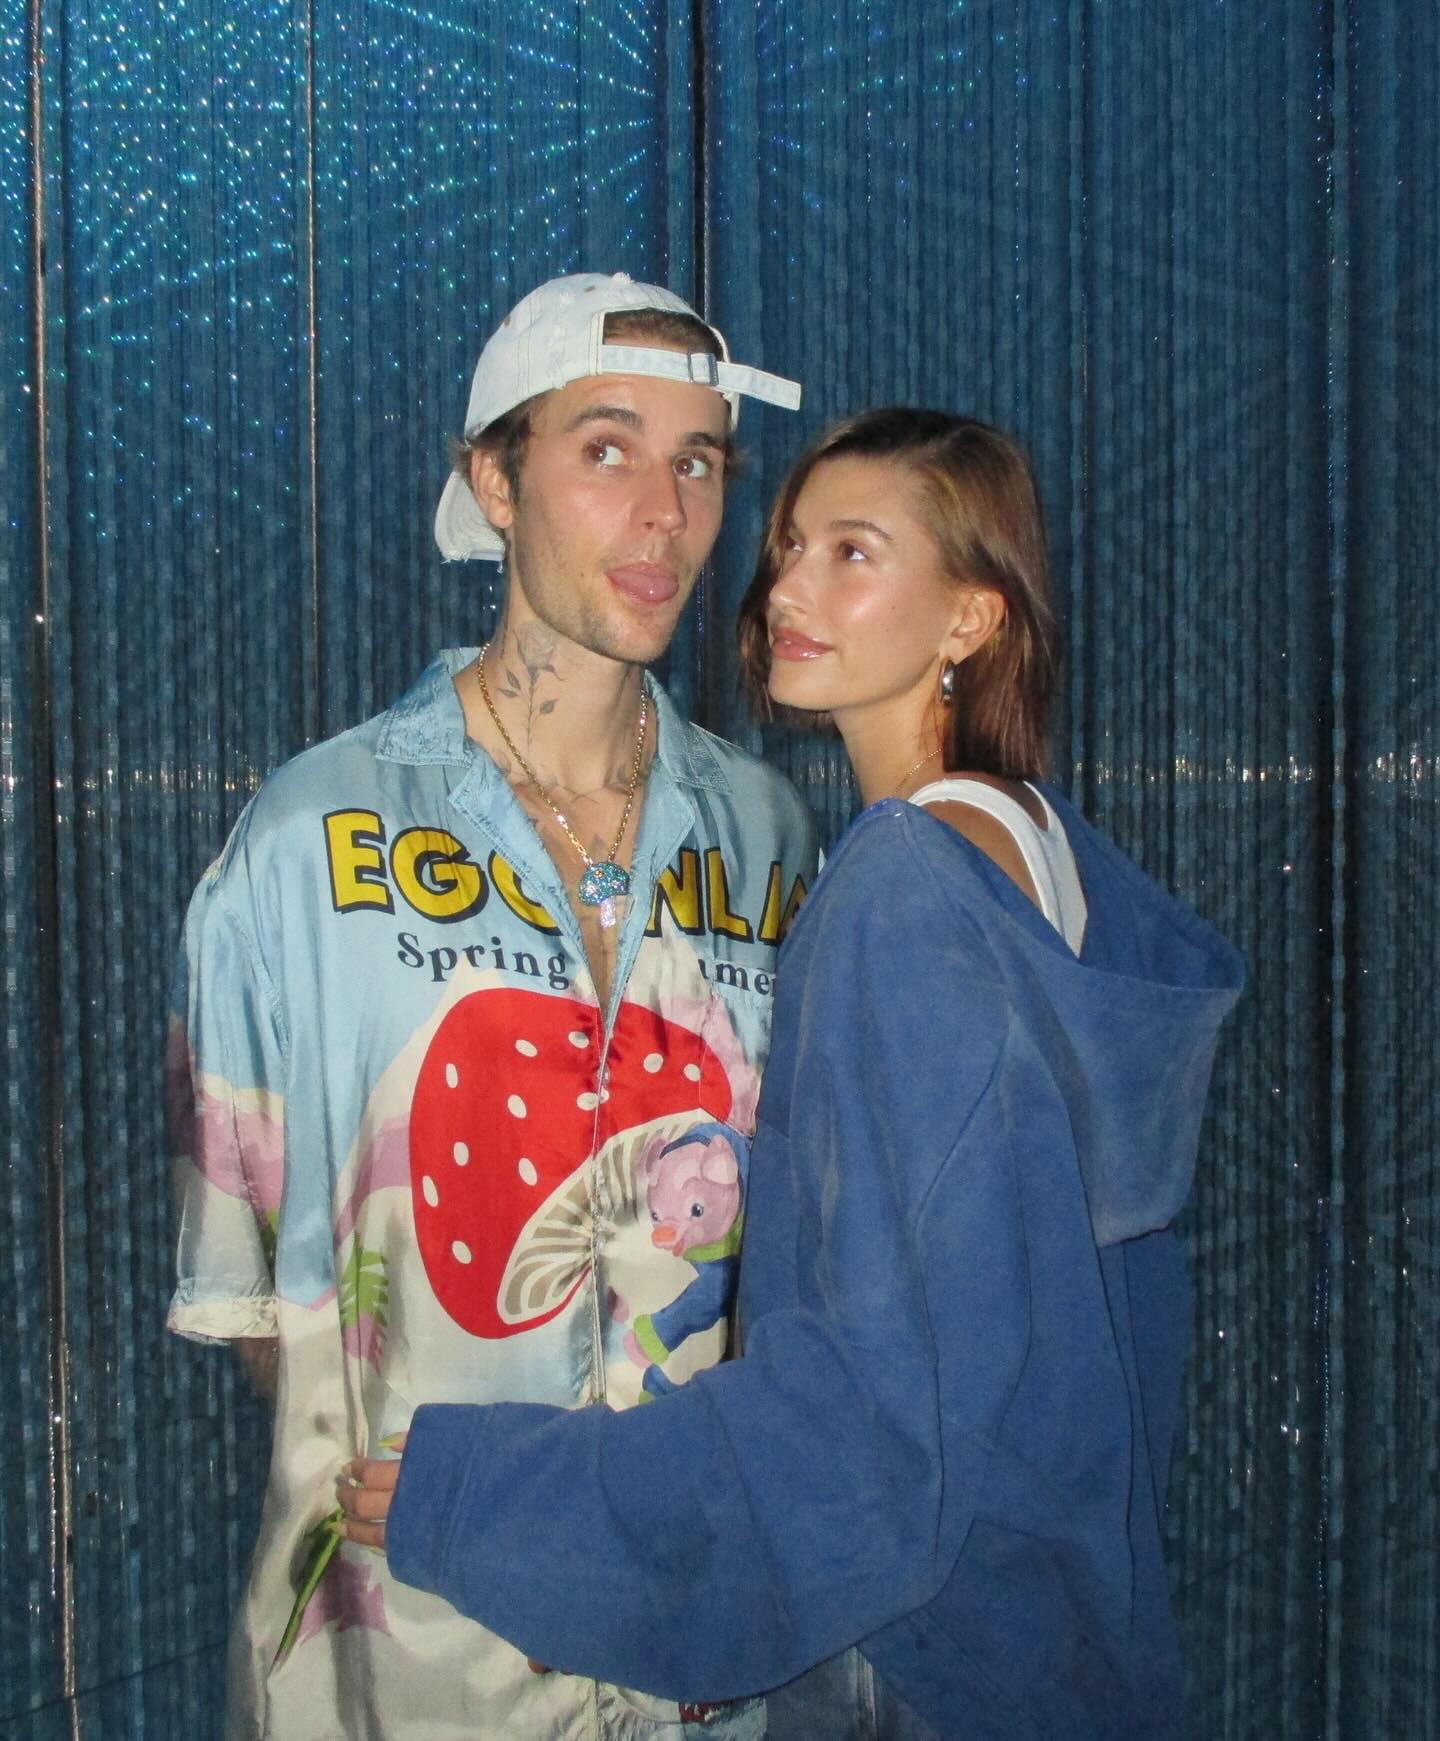 Hailey and Justin have sparked split rumors recently